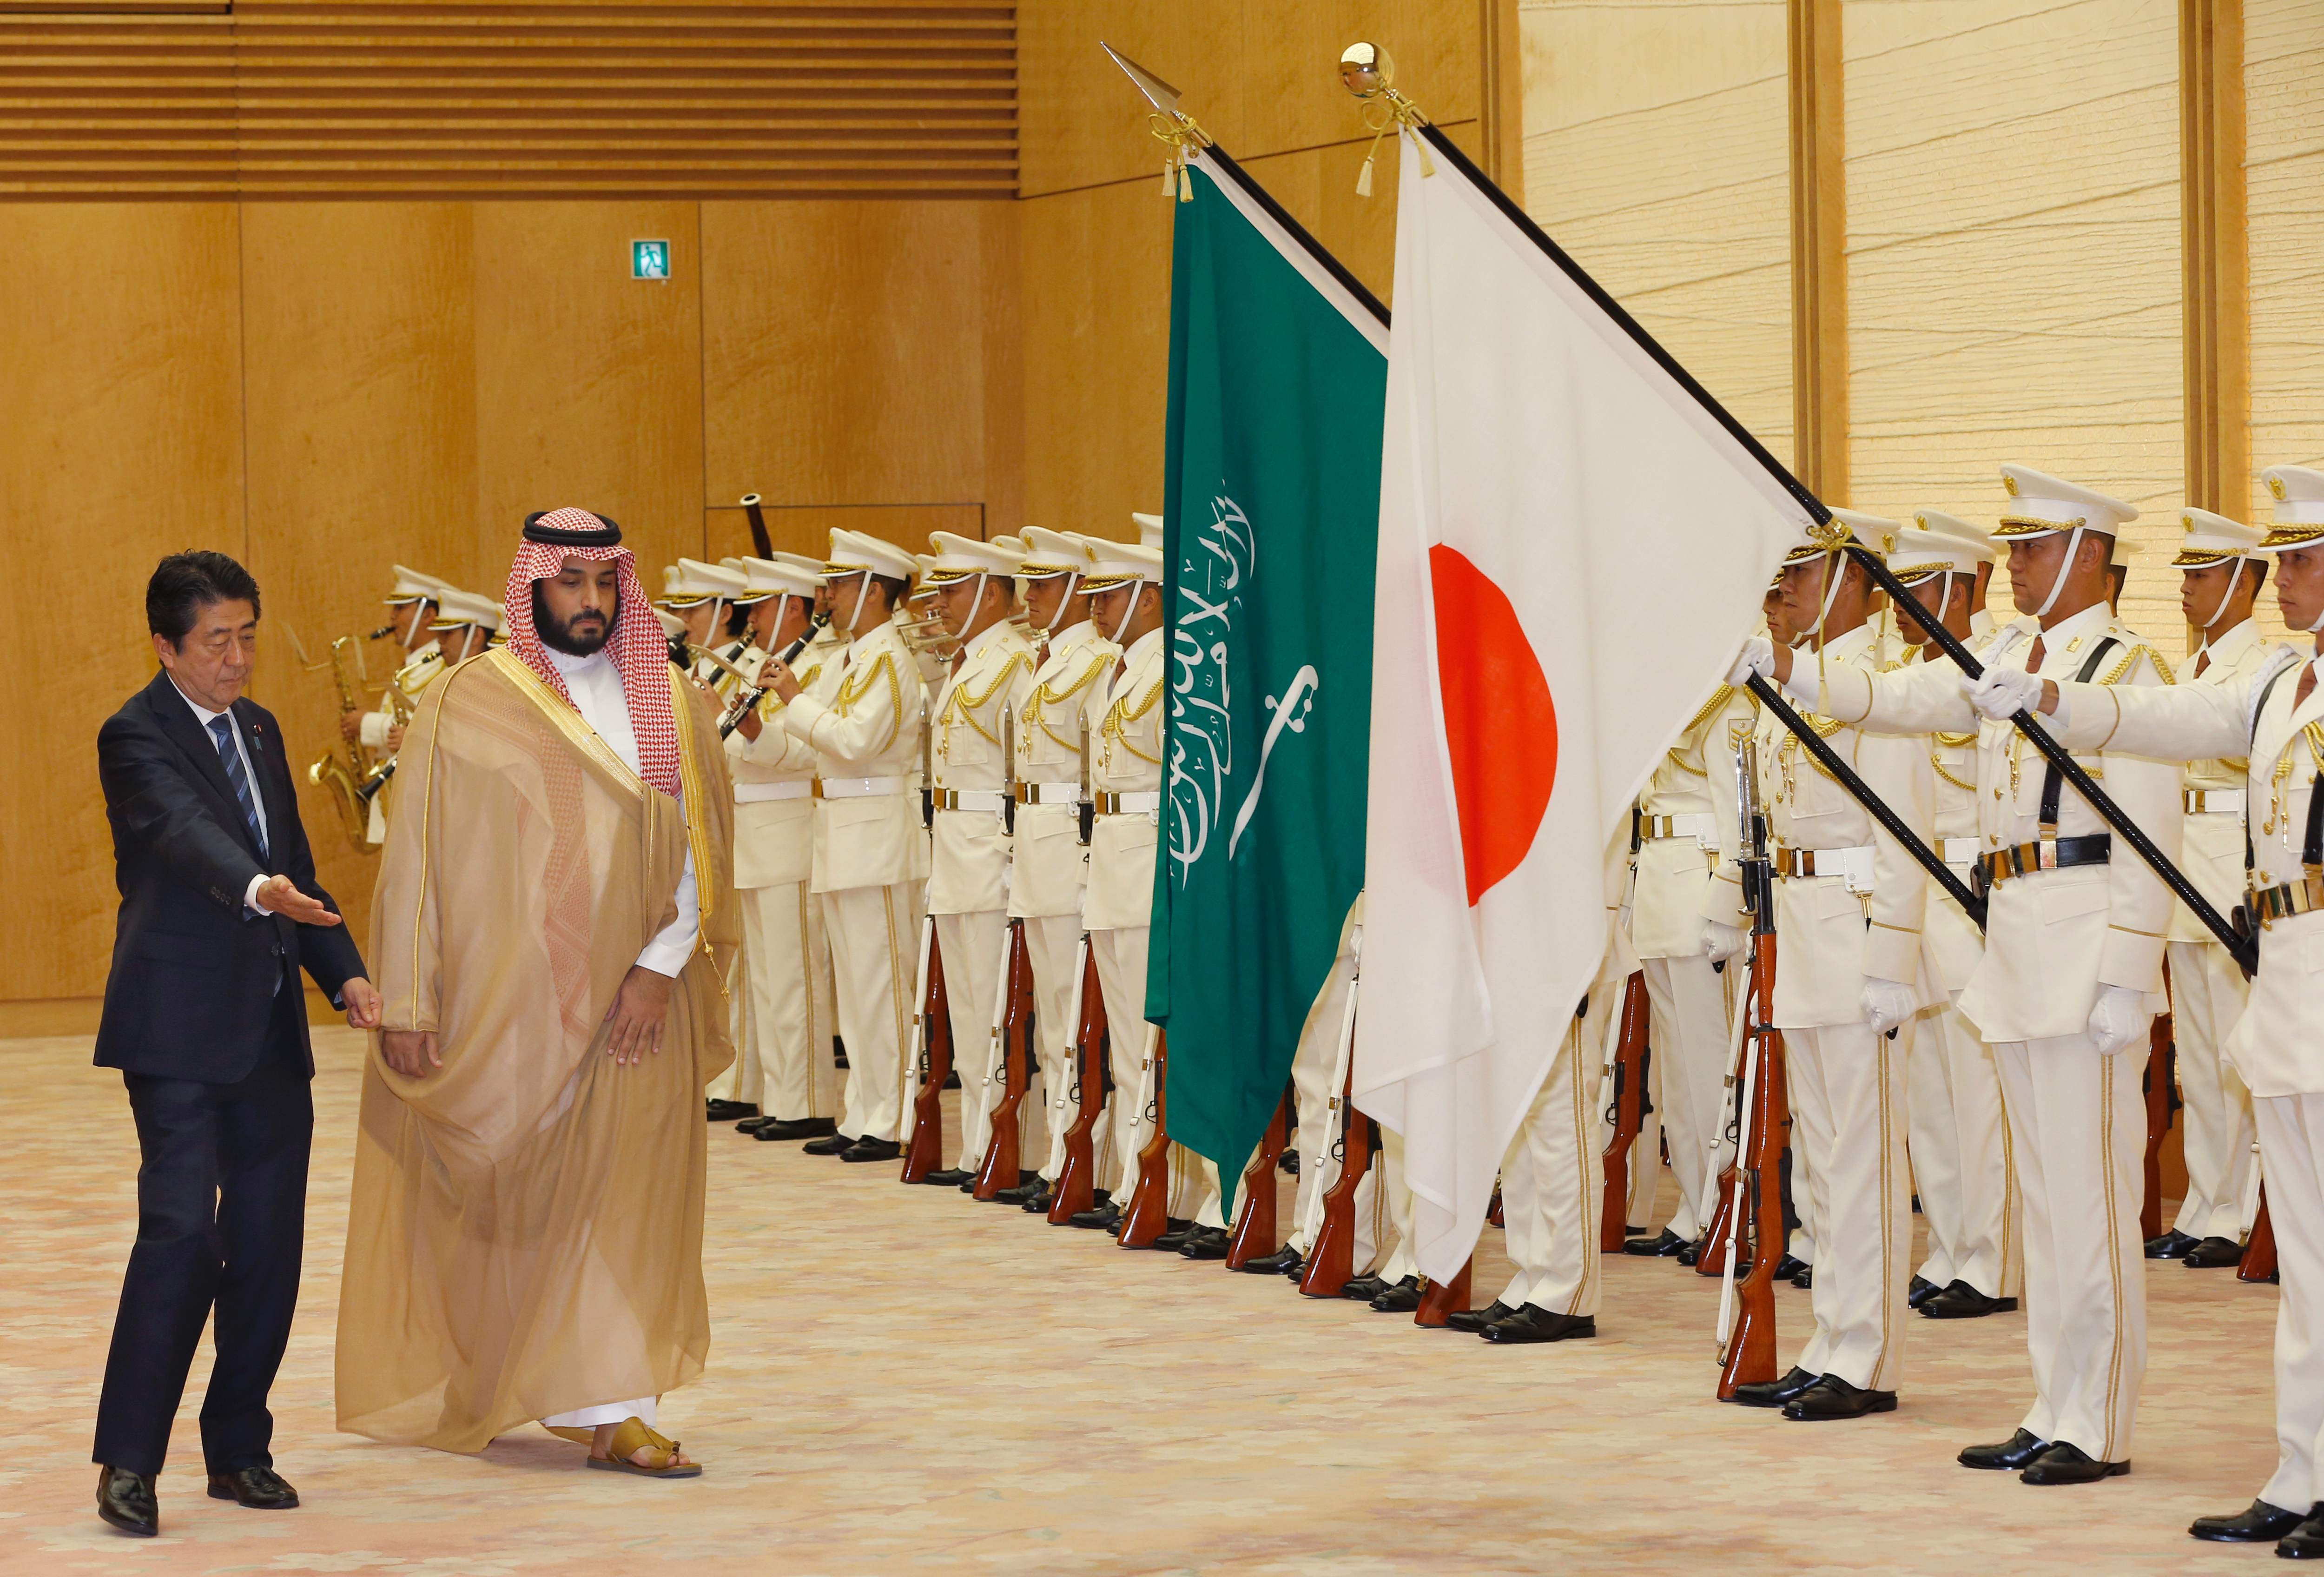 Prime Minister Shinzo Abe escorts visiting Saudi Arabia's Deputy Crown Prince Mohammed bin Salman as they review a guard of honor prior to their meeting at Abe's office in Tokyo on Thursday. | AFP-JIJI